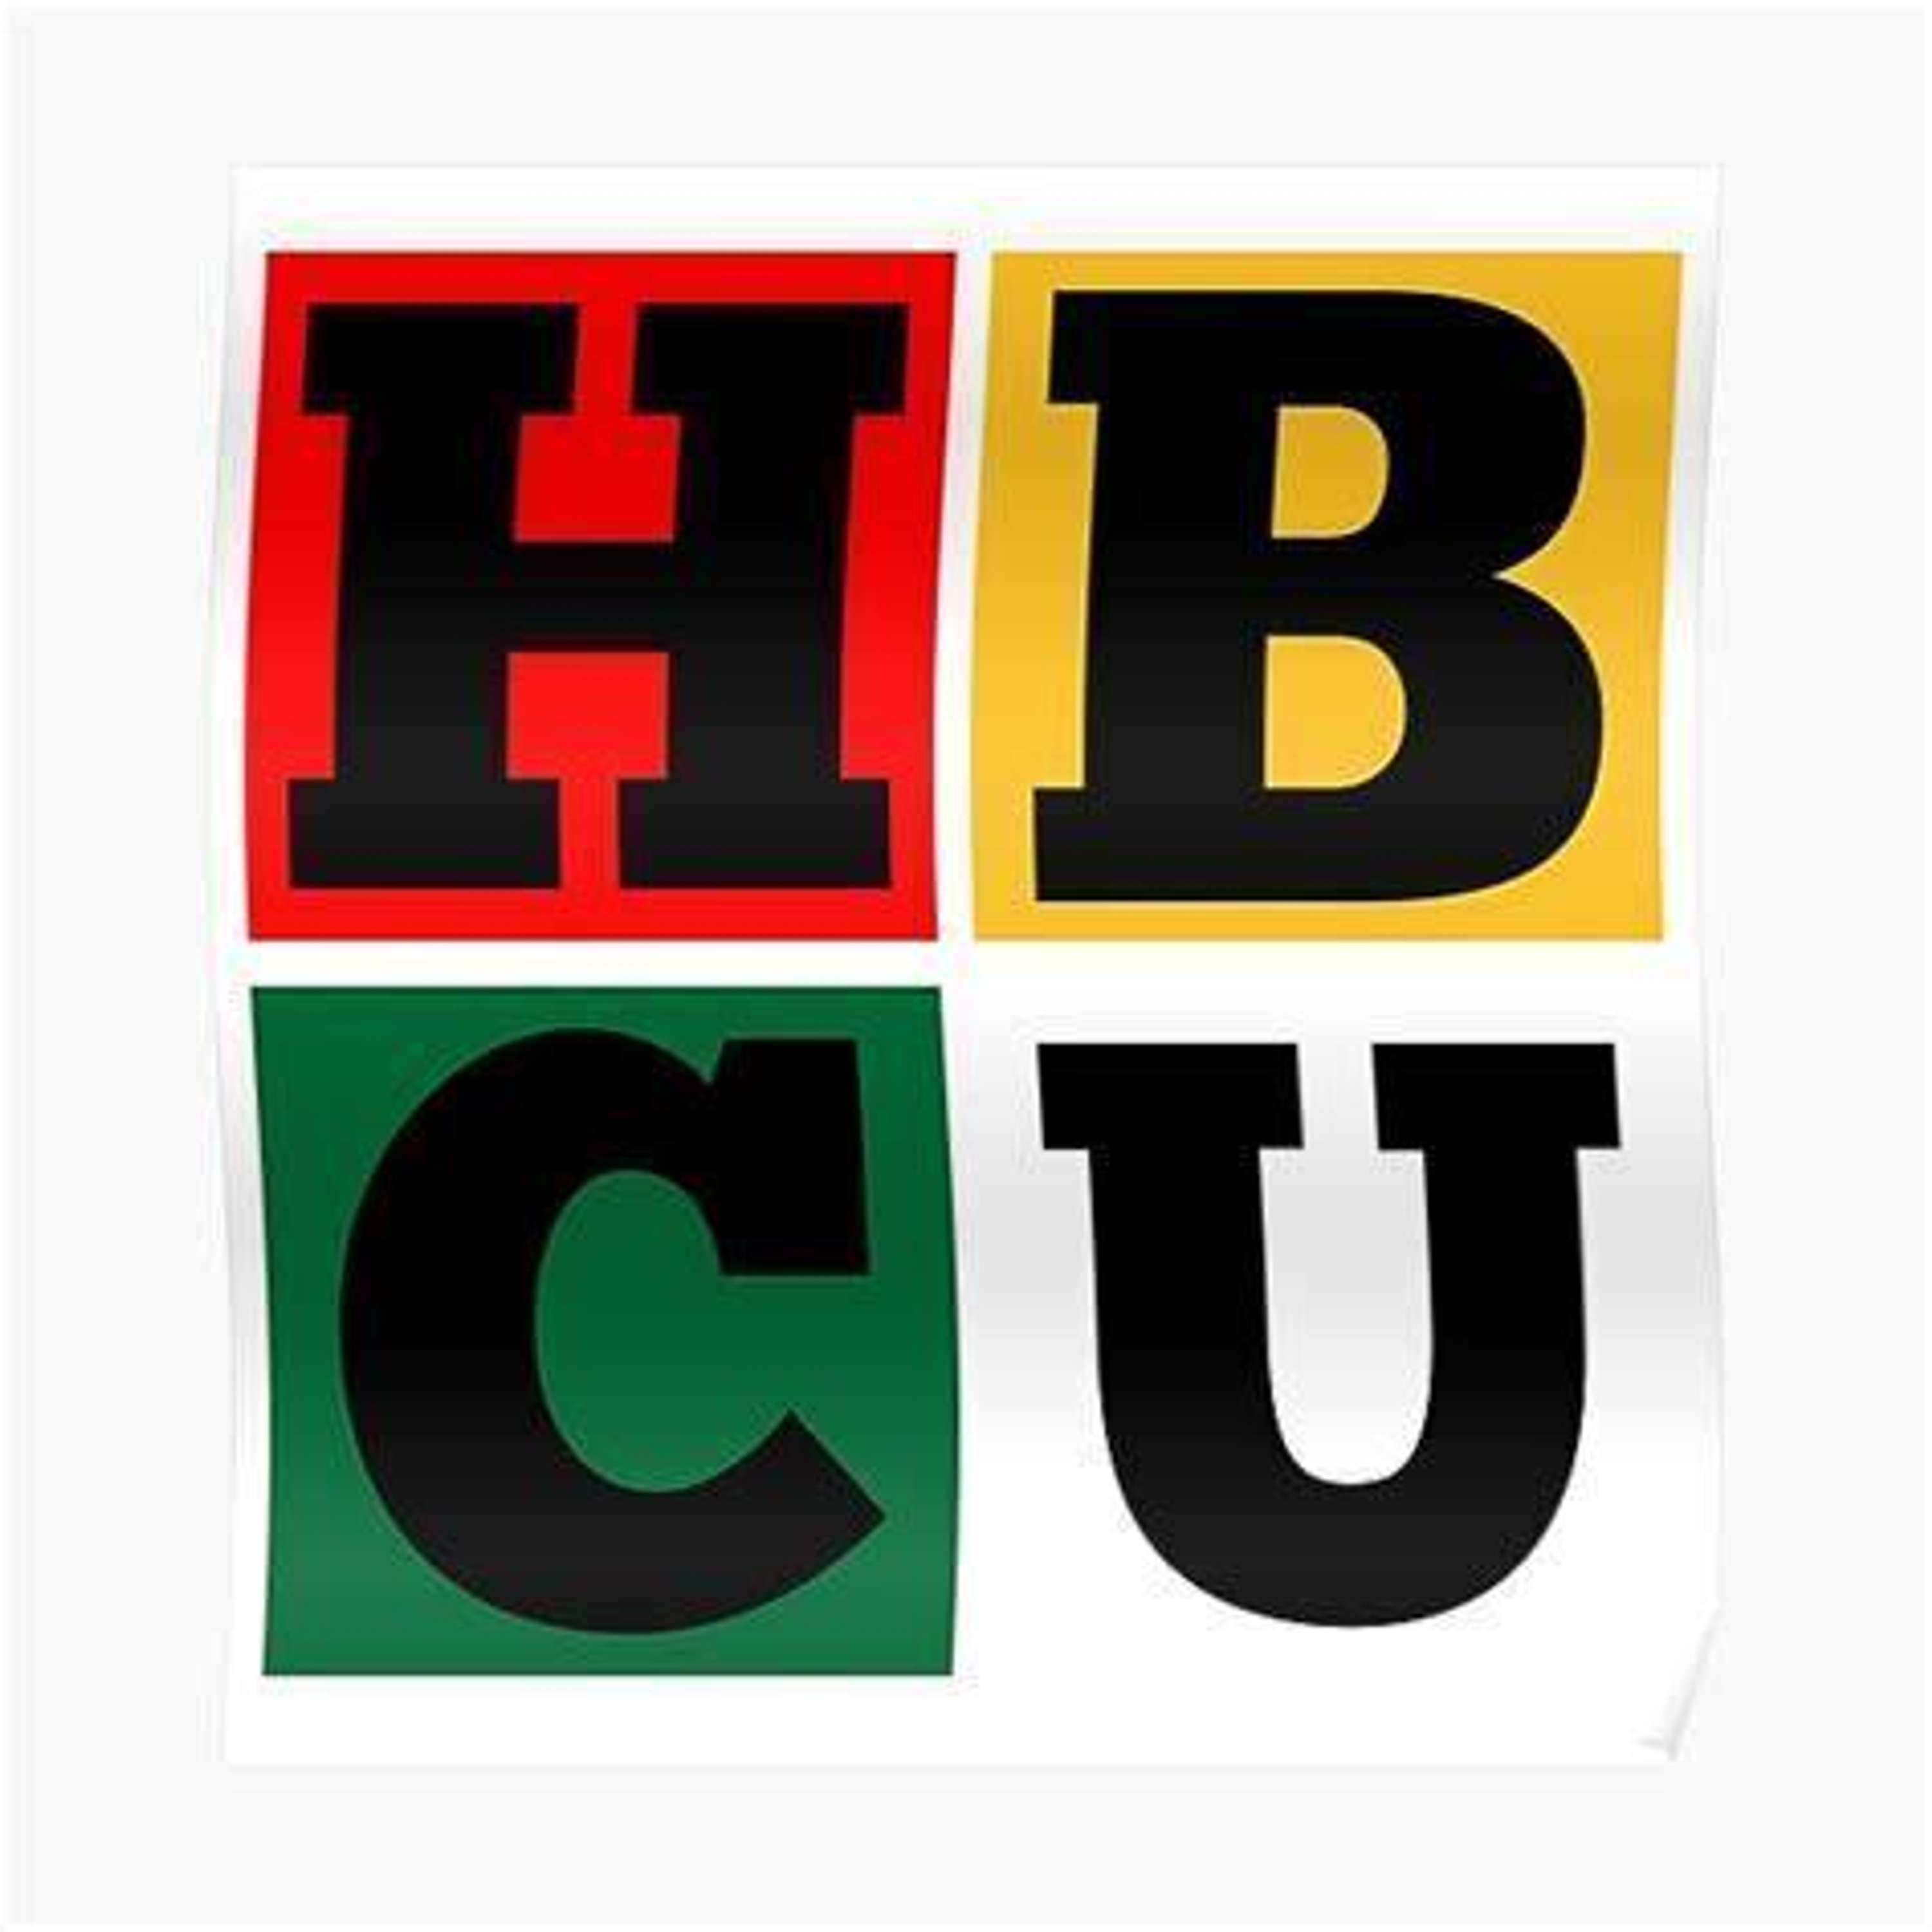 Why H.B.C.U.'s? (Historically Black Colleges and Universities)